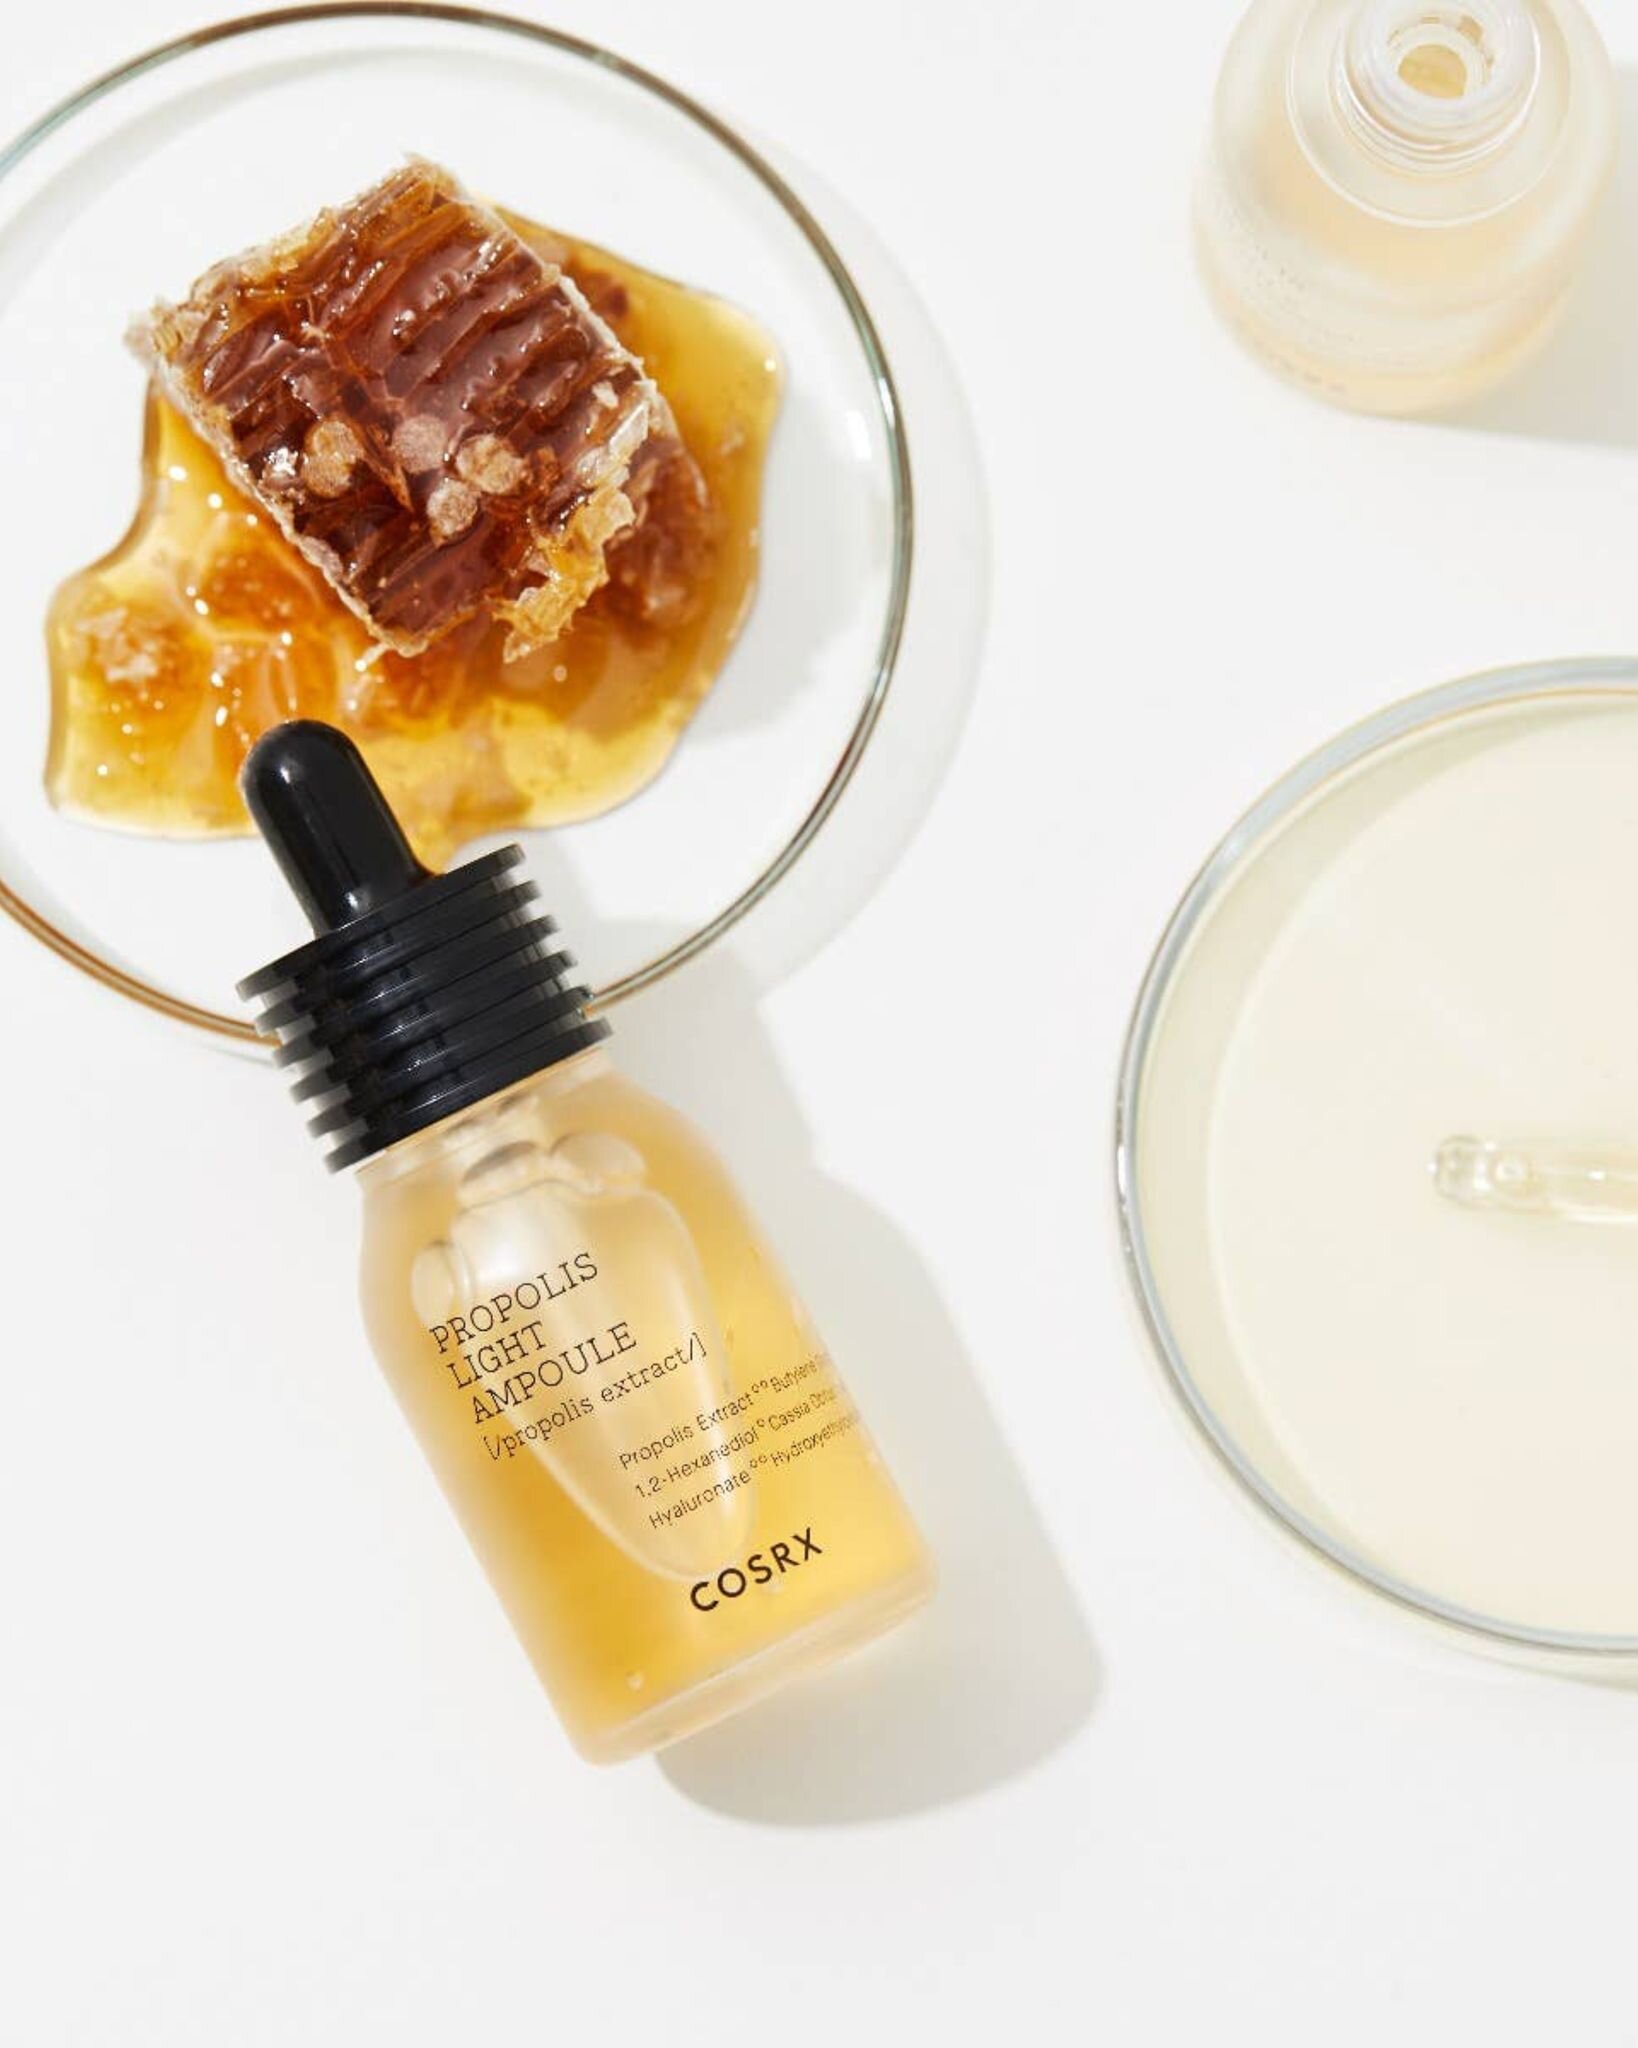 This do-it-all ampoule by COSRX is powered with 83.25% black bee propolis that heals inflamed skin, and banishes acne-causing bacteria. This ampoule is incredibly hydrating and brightening, and will plump up your skin to achieve that dewy, bouncy, gl